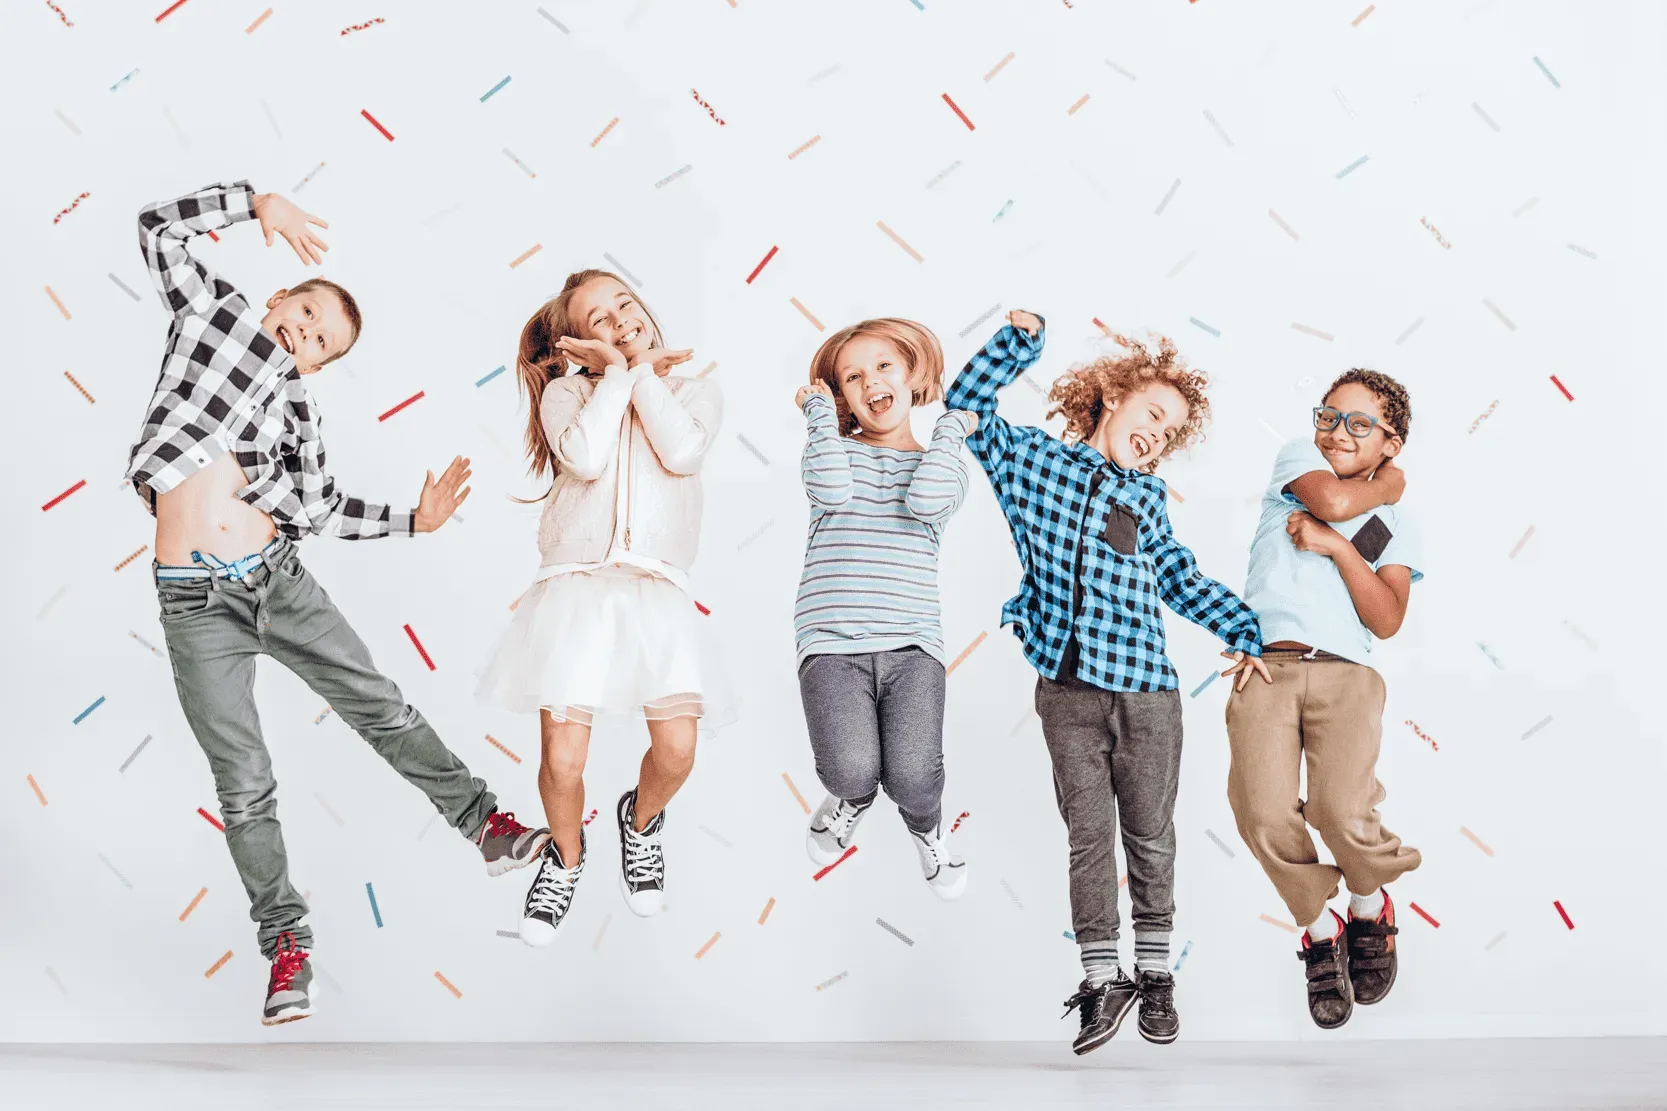 5 children jumping in joy against white background with confetti